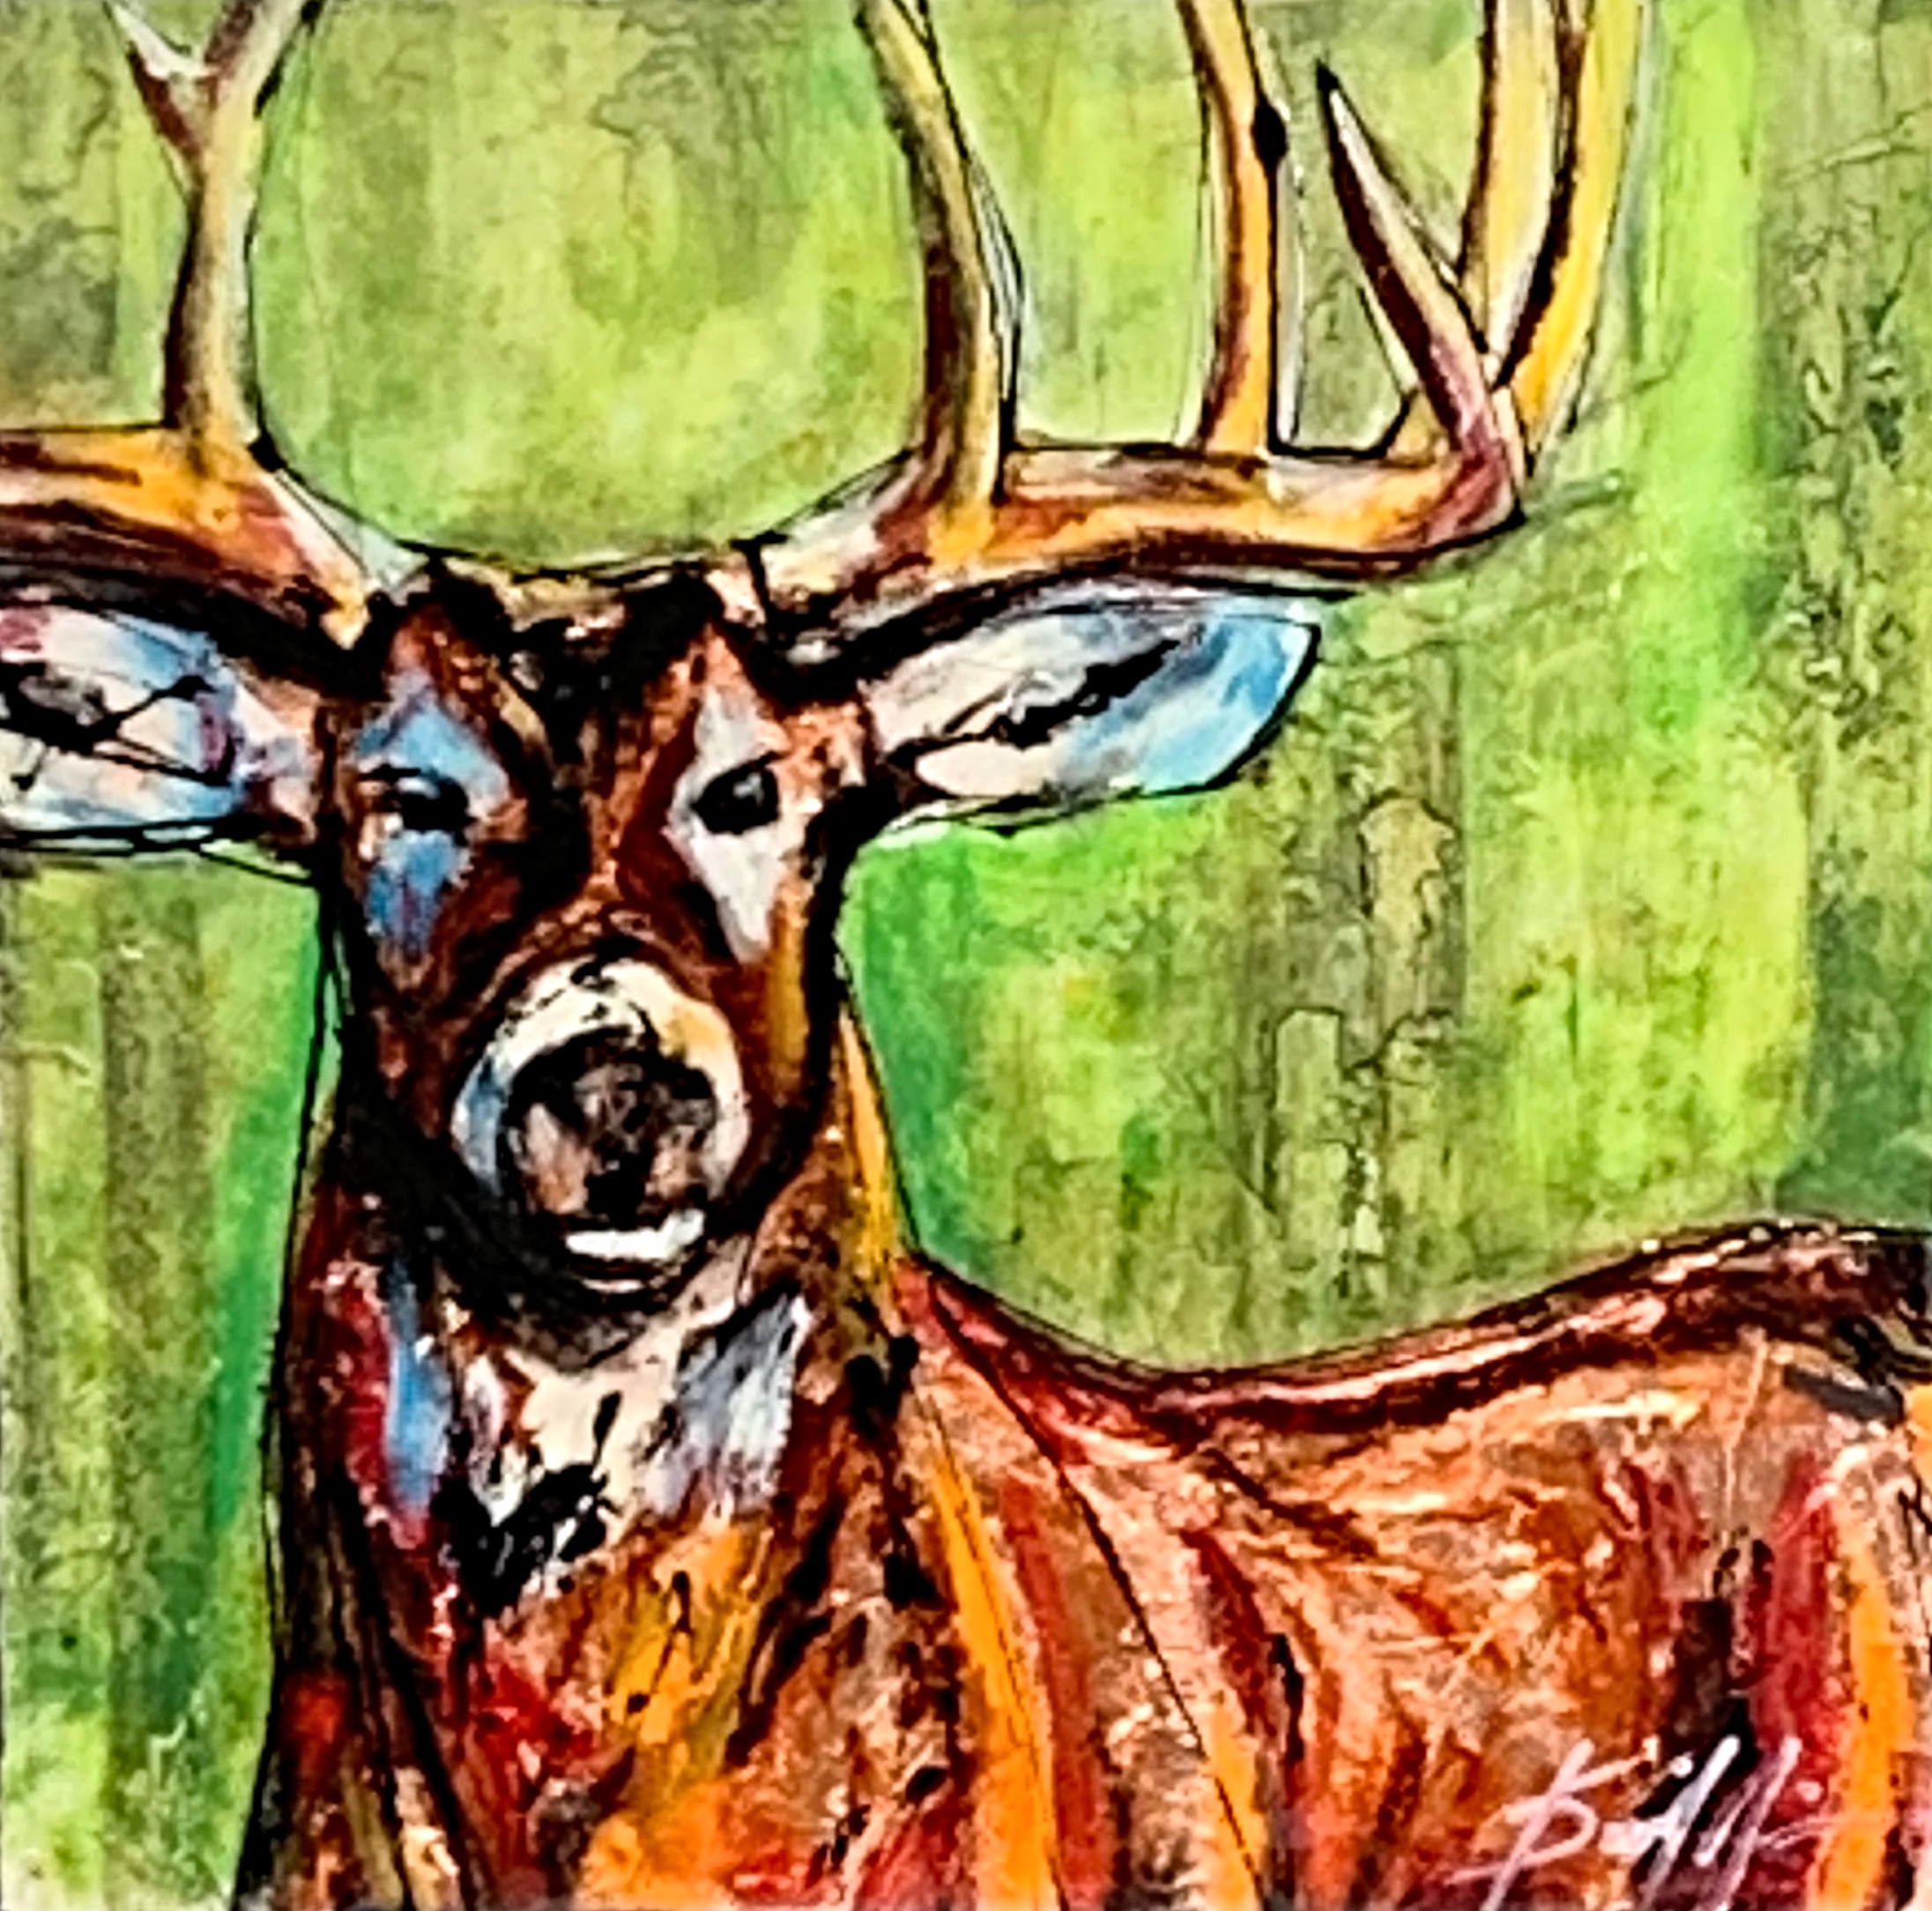 Stranger, mixed media deer painting on an apple green background by David Zimmerman | Effusion Art Gallery + Cast Glass Studio, Invermere BC